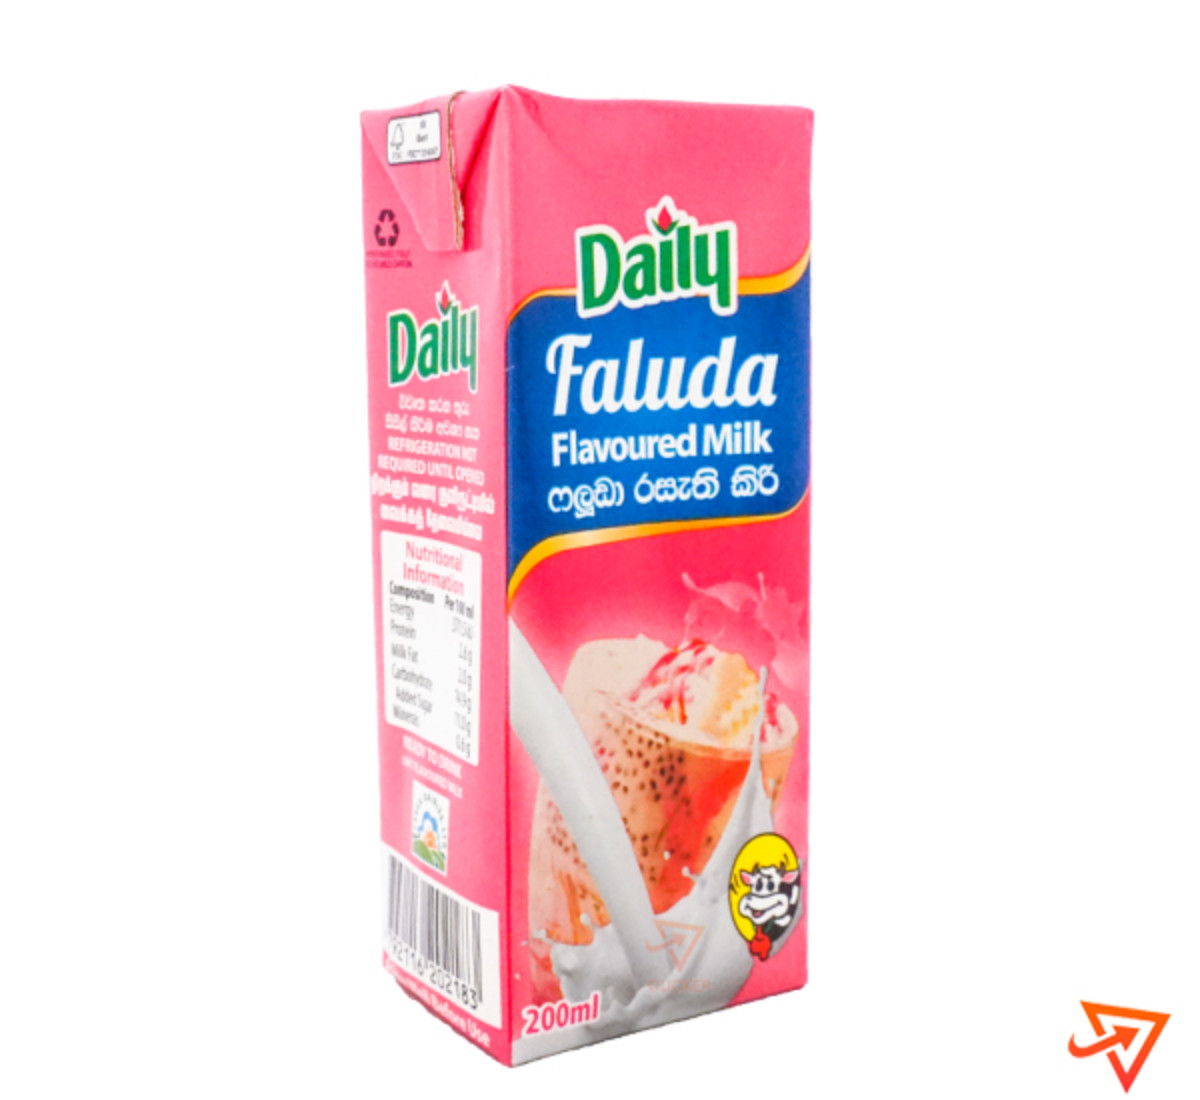 Clicker product 180ml DAILY faluda flavoured milk 1168